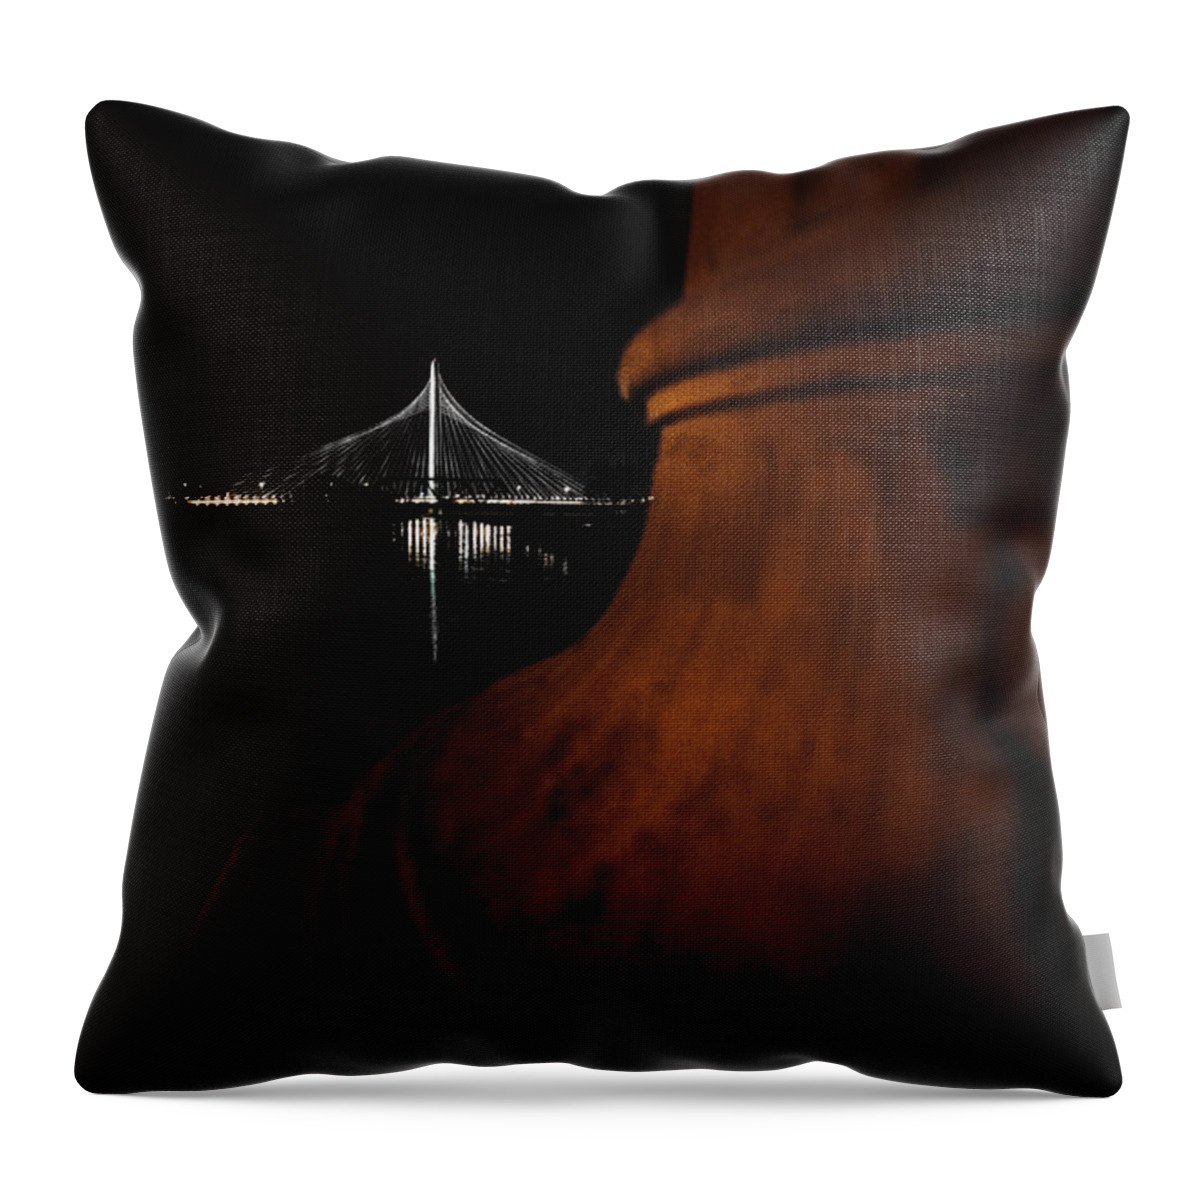 Noir Throw Pillow featuring the photograph Noir Dallas by Peter Hull